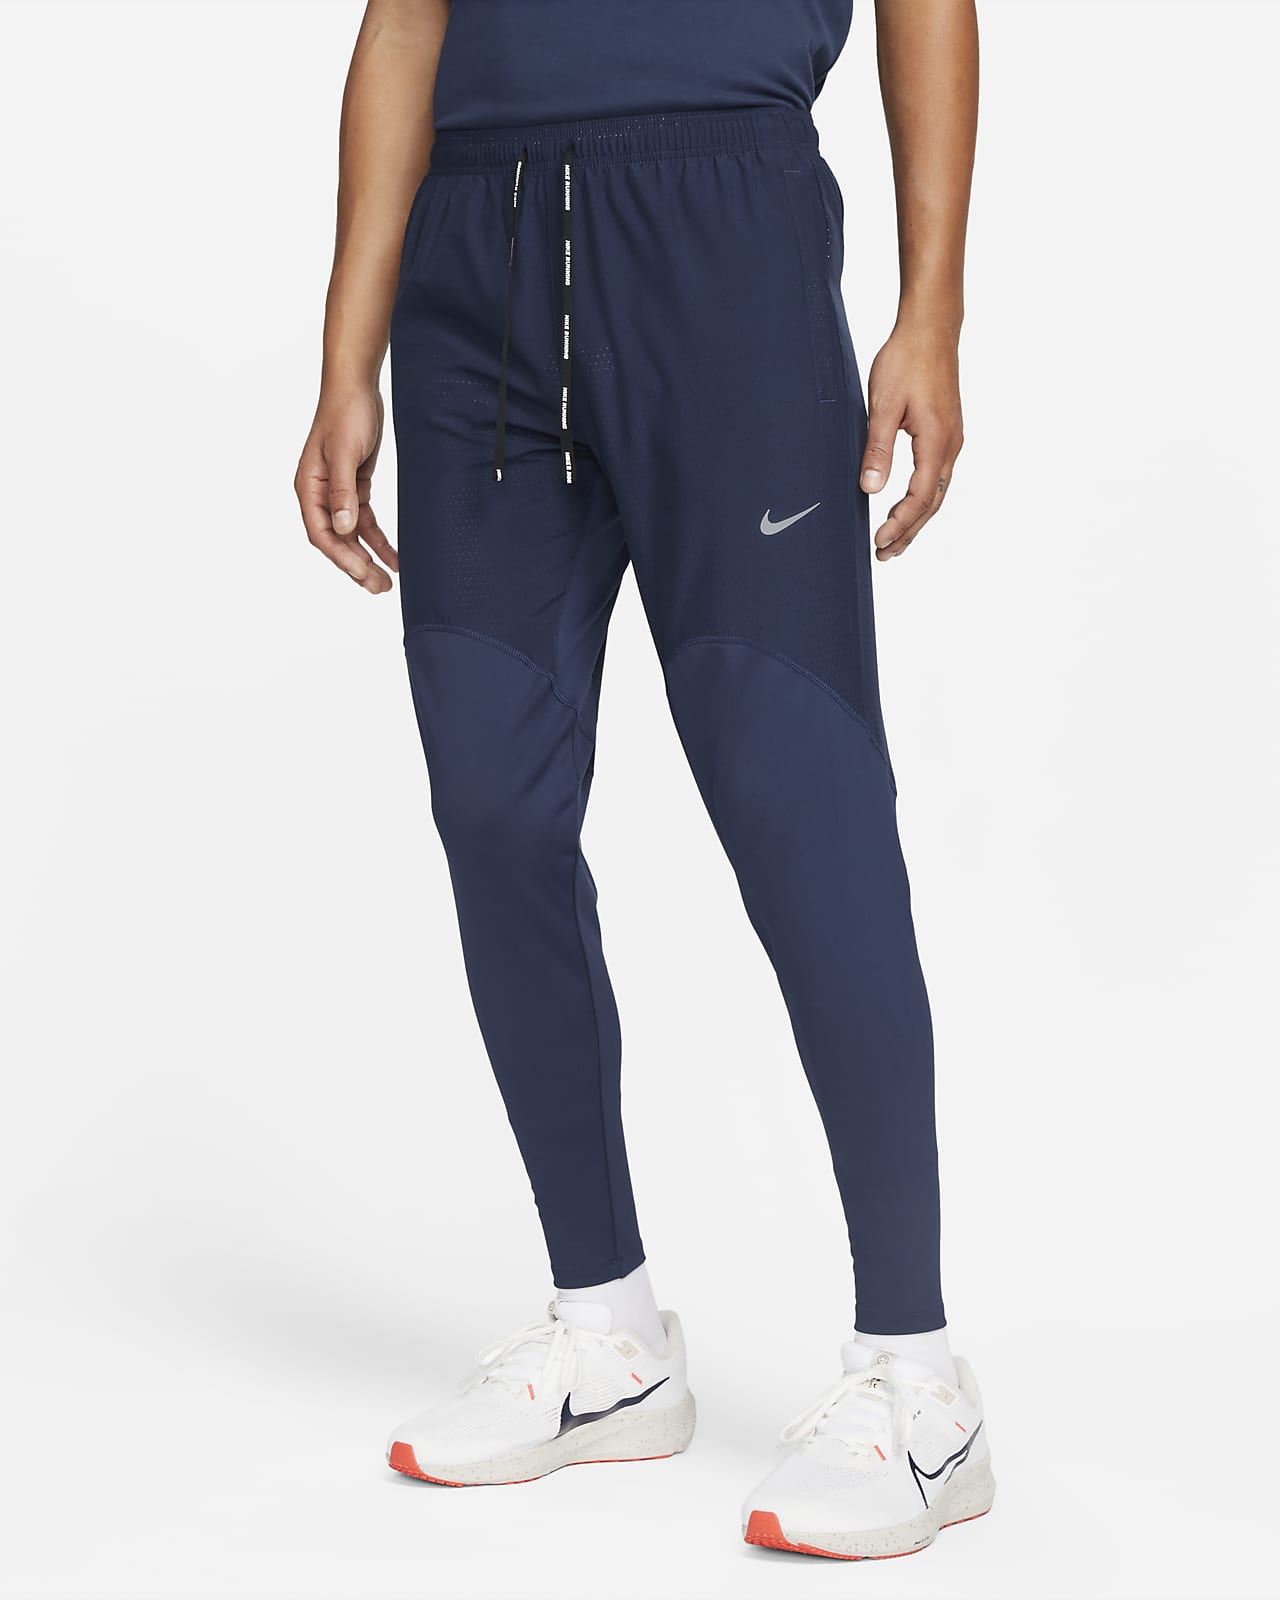 Black and Blue Nike Sportswear NSW Mens Track Trousers